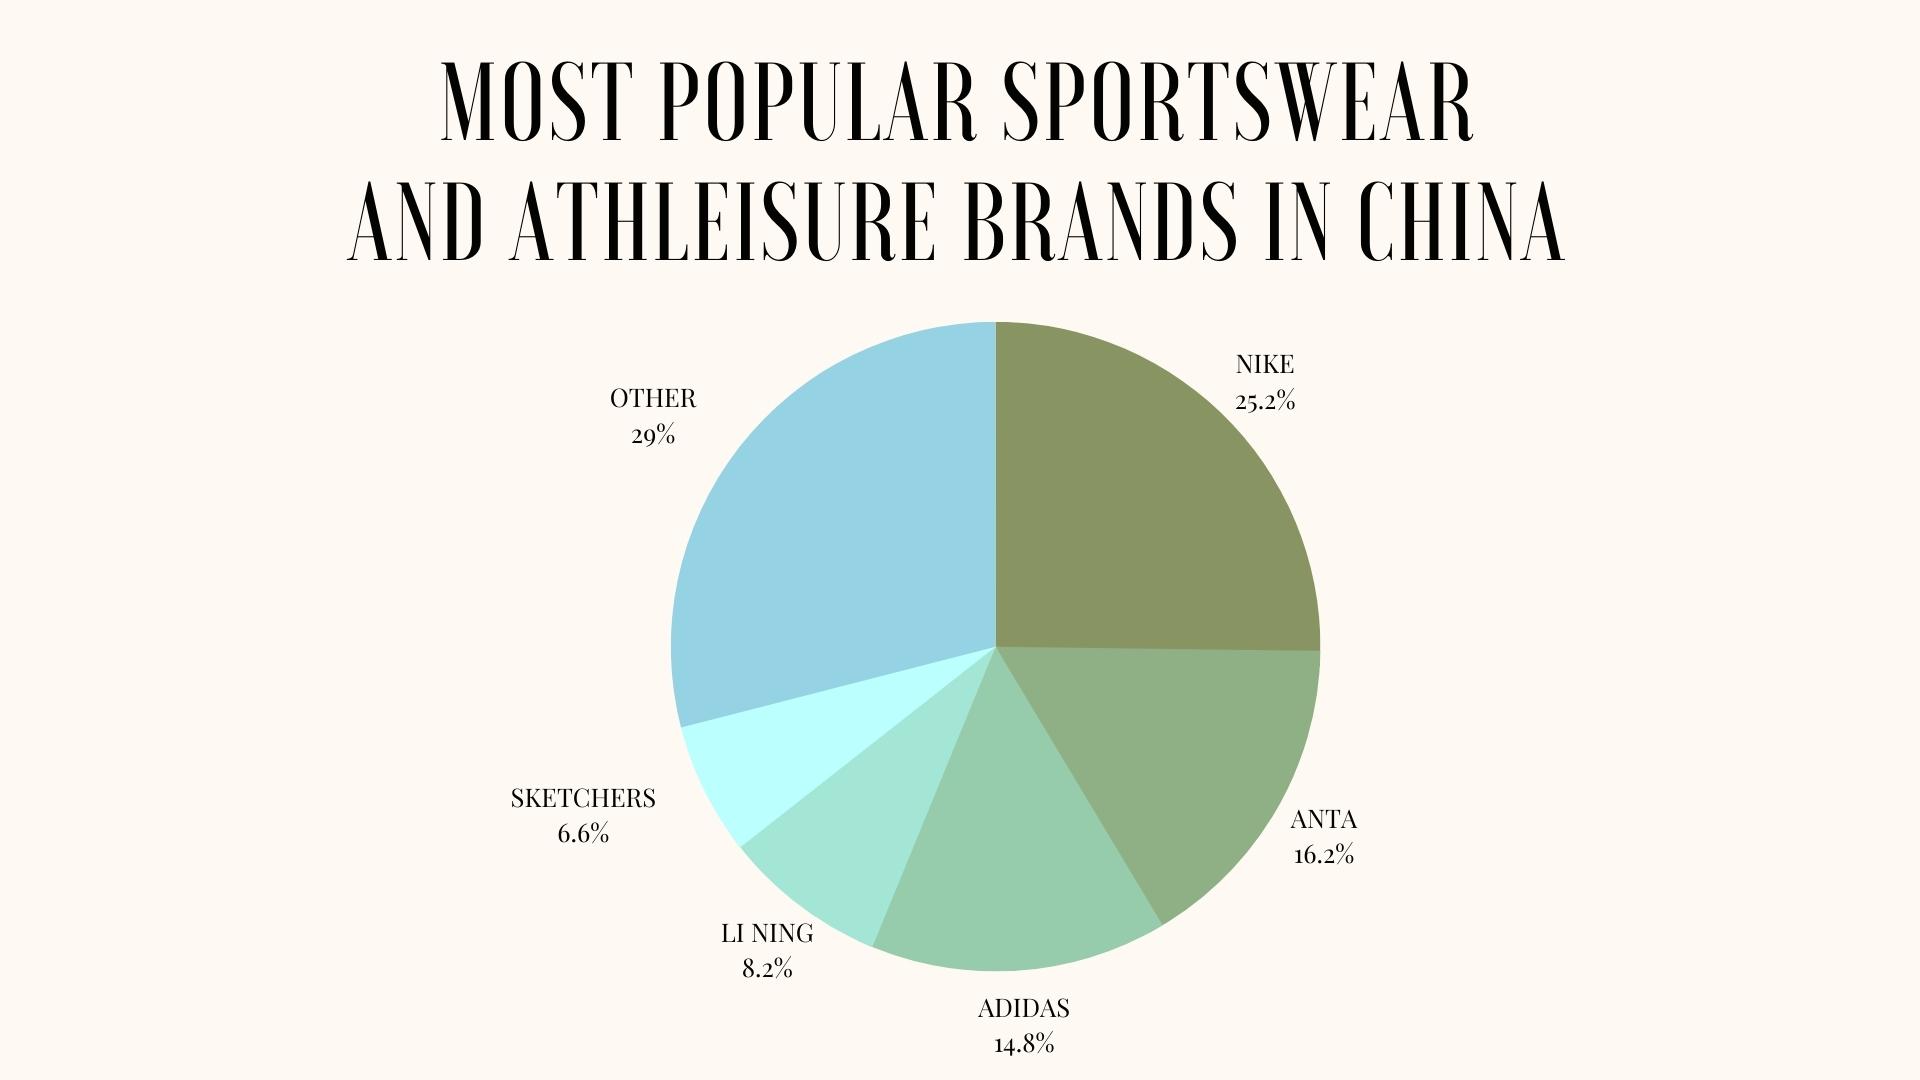 Chinese millennials embrace Supreme streetwear brand, and counterfeiters  step in to feed demand